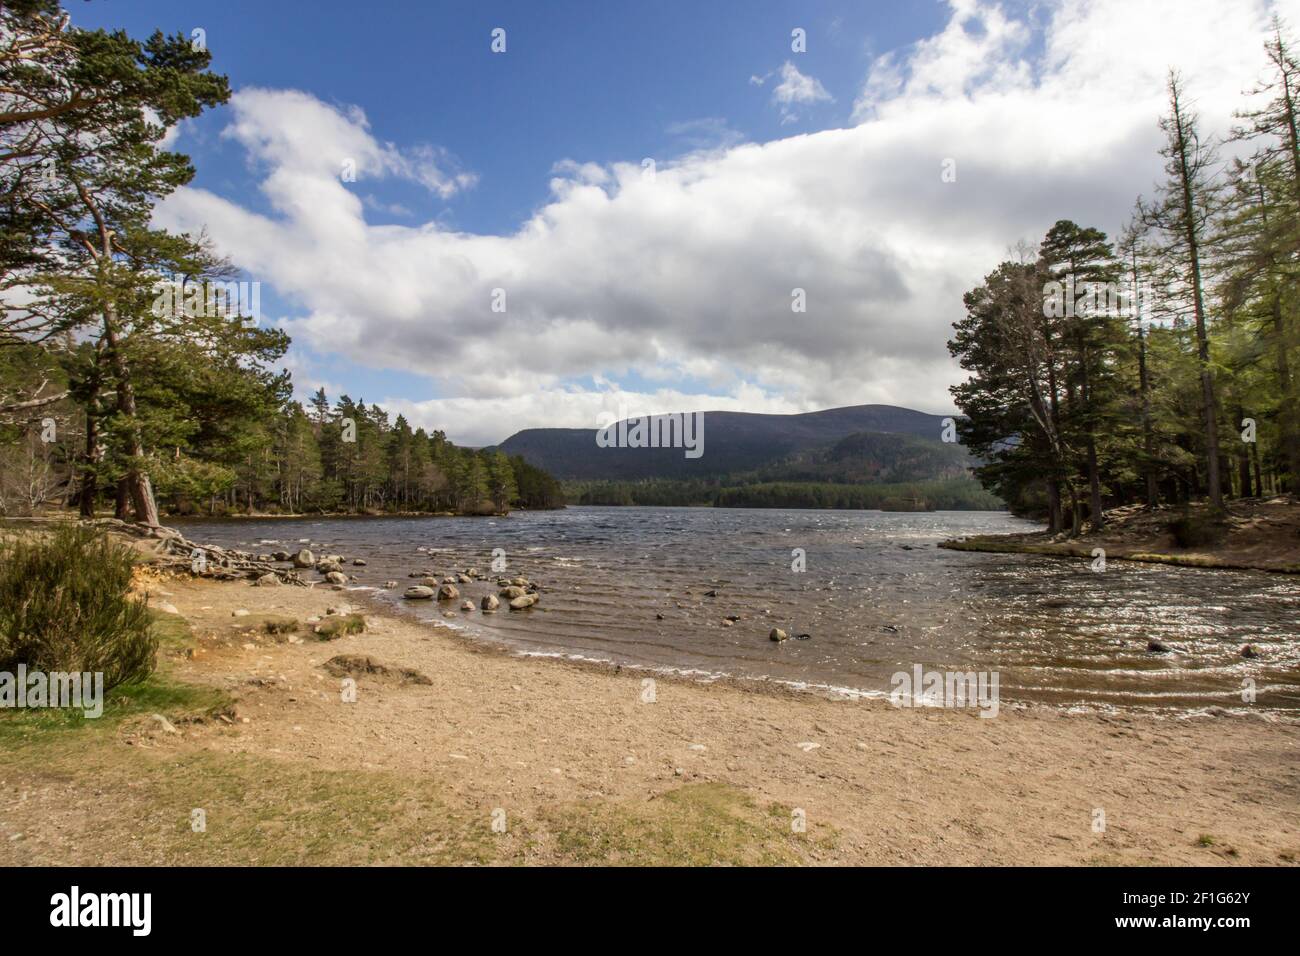 The Northern shore of Loch an Eilein in the Rothiemurchus forest in the Cairngorms National Park, Scotland on a sunny day Stock Photo